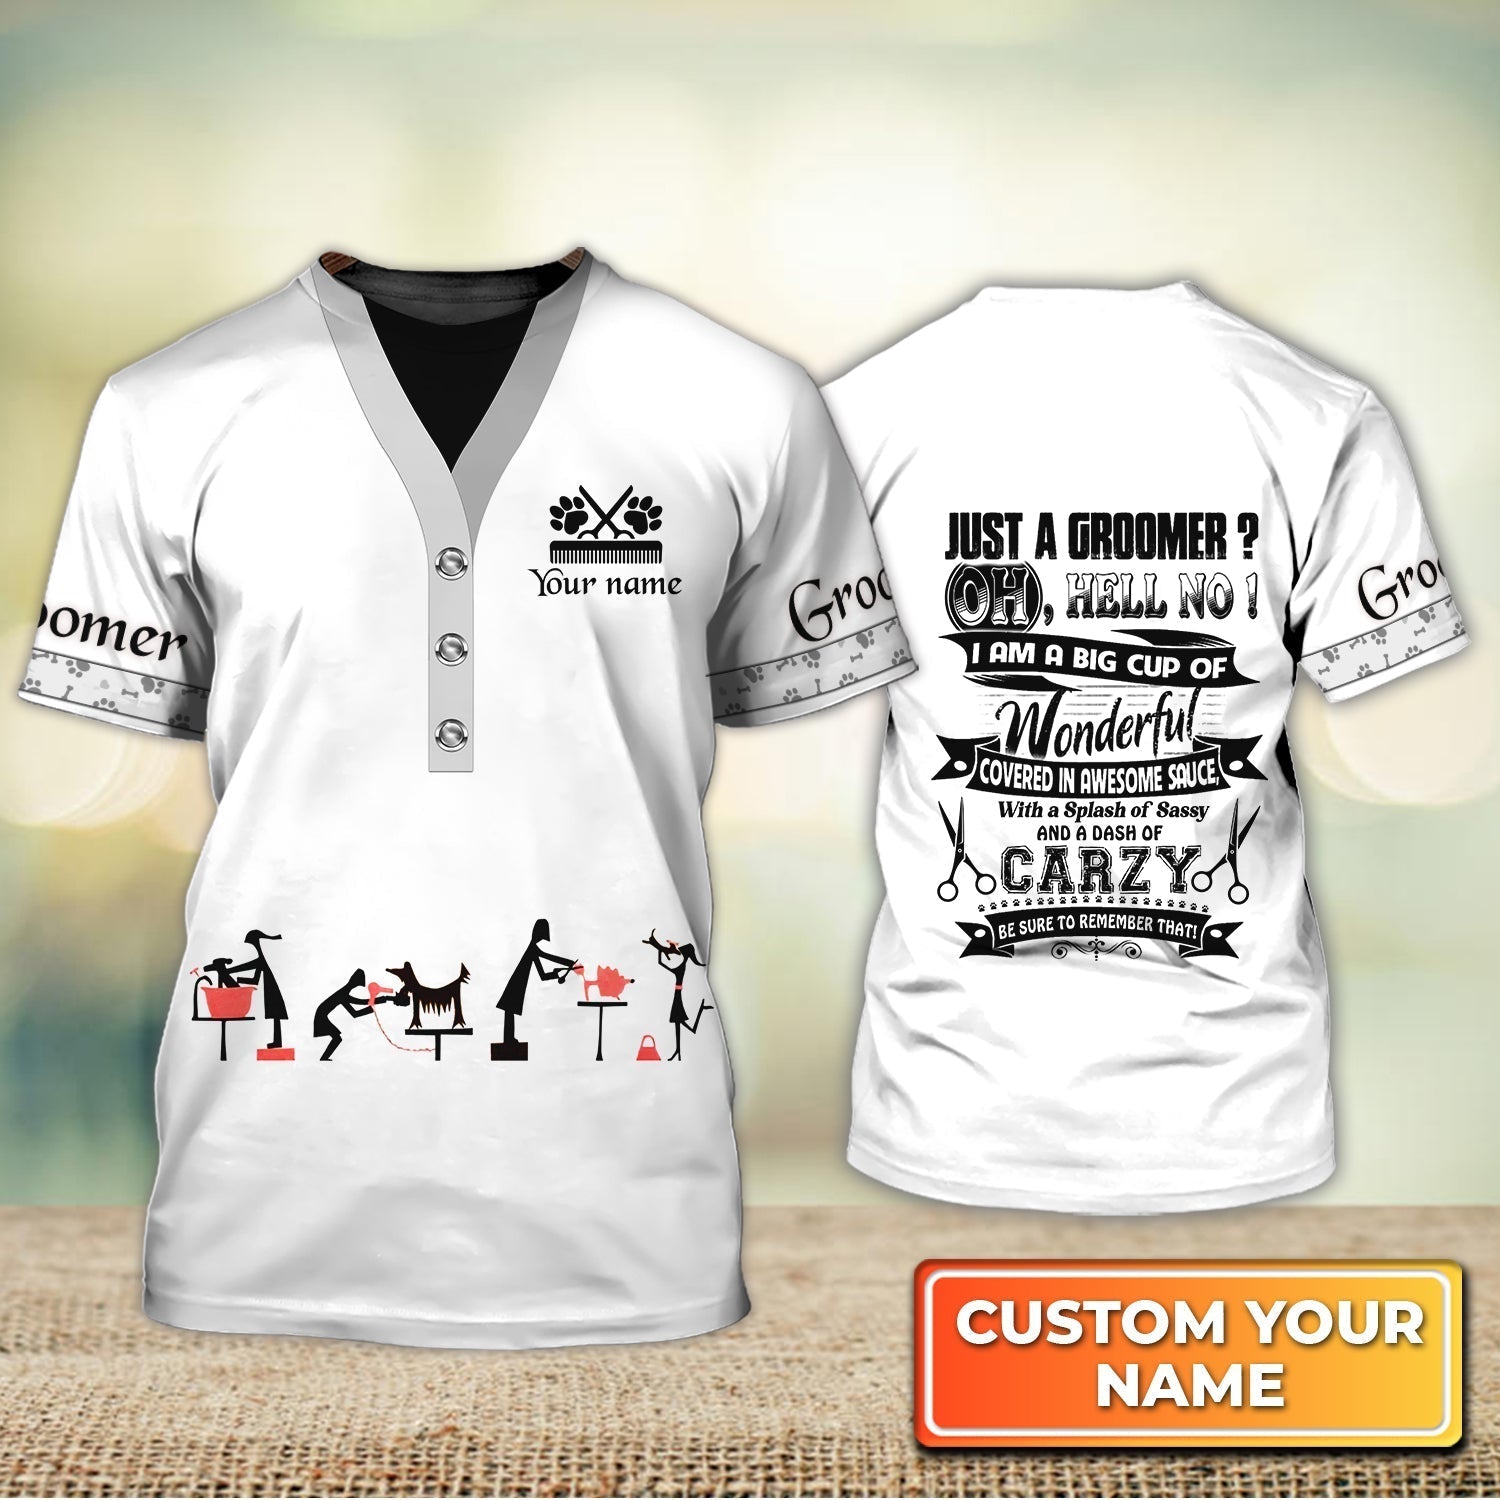 Customized White Groomer 3D Shirt Just A Groomer Dog Groomer Pet Groomer Uniform White Salon Pet Gift